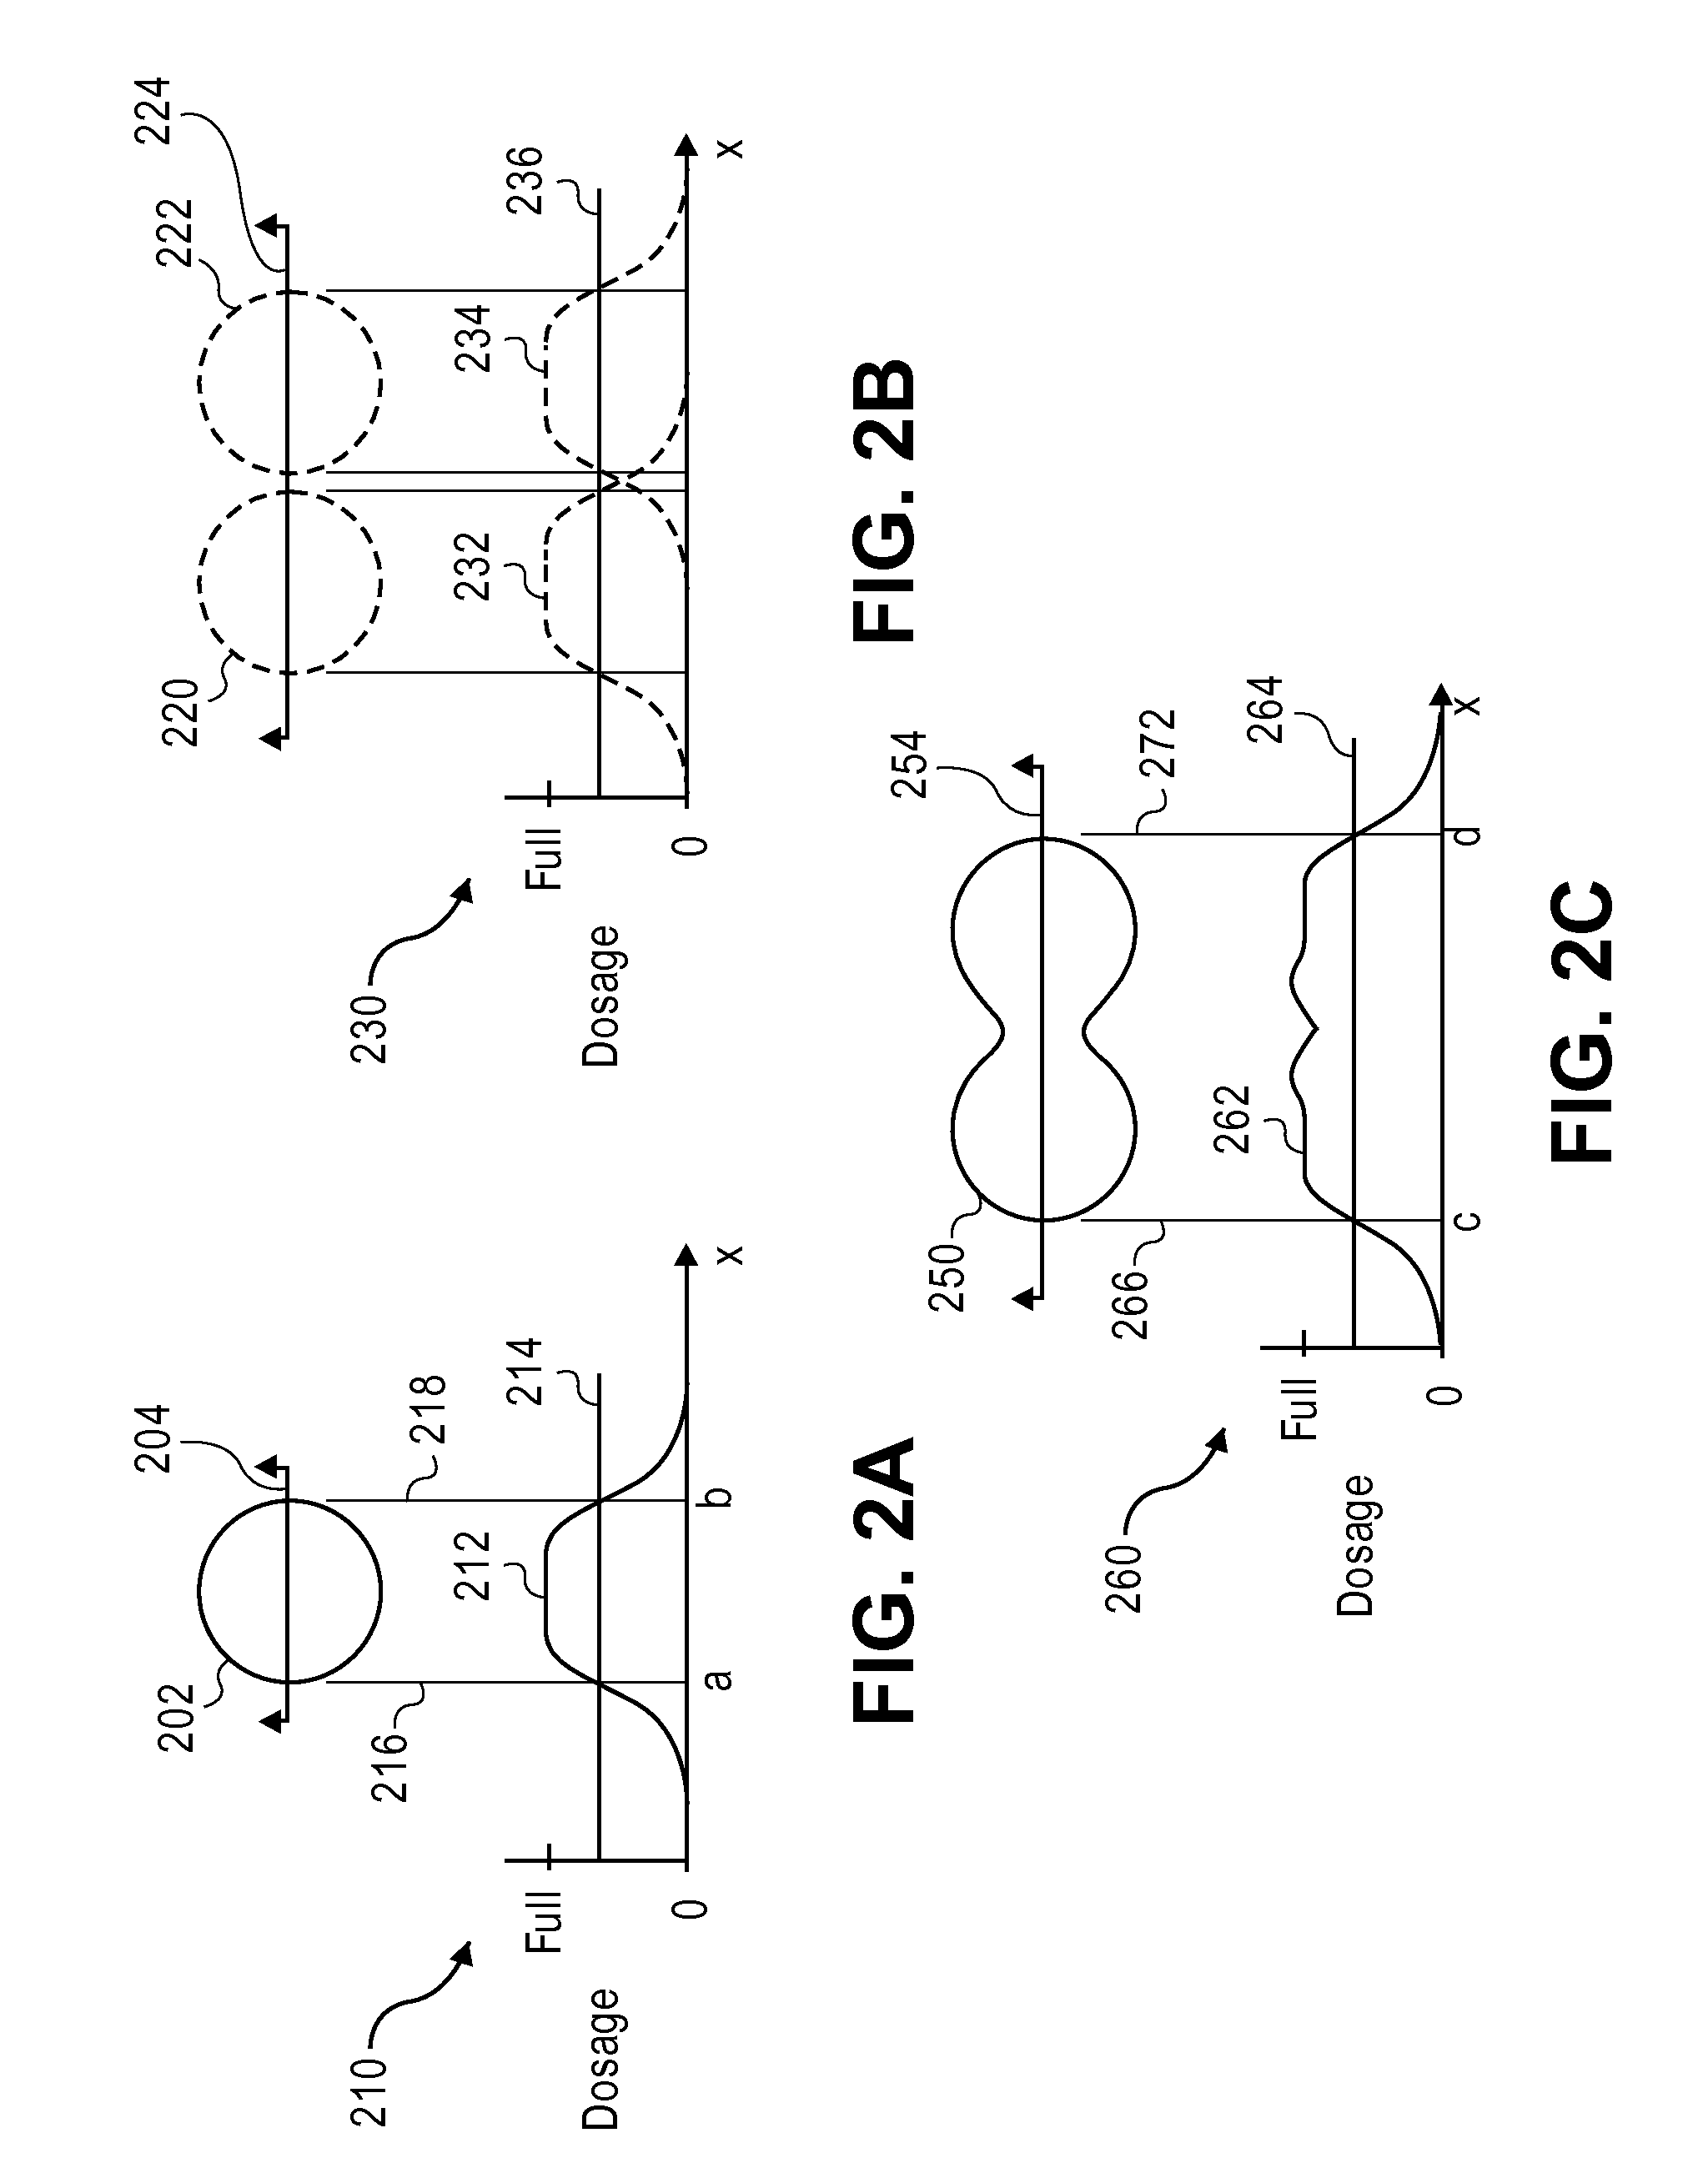 Method for fracturing and forming a pattern using curvilinear characters with charged particle beam lithography